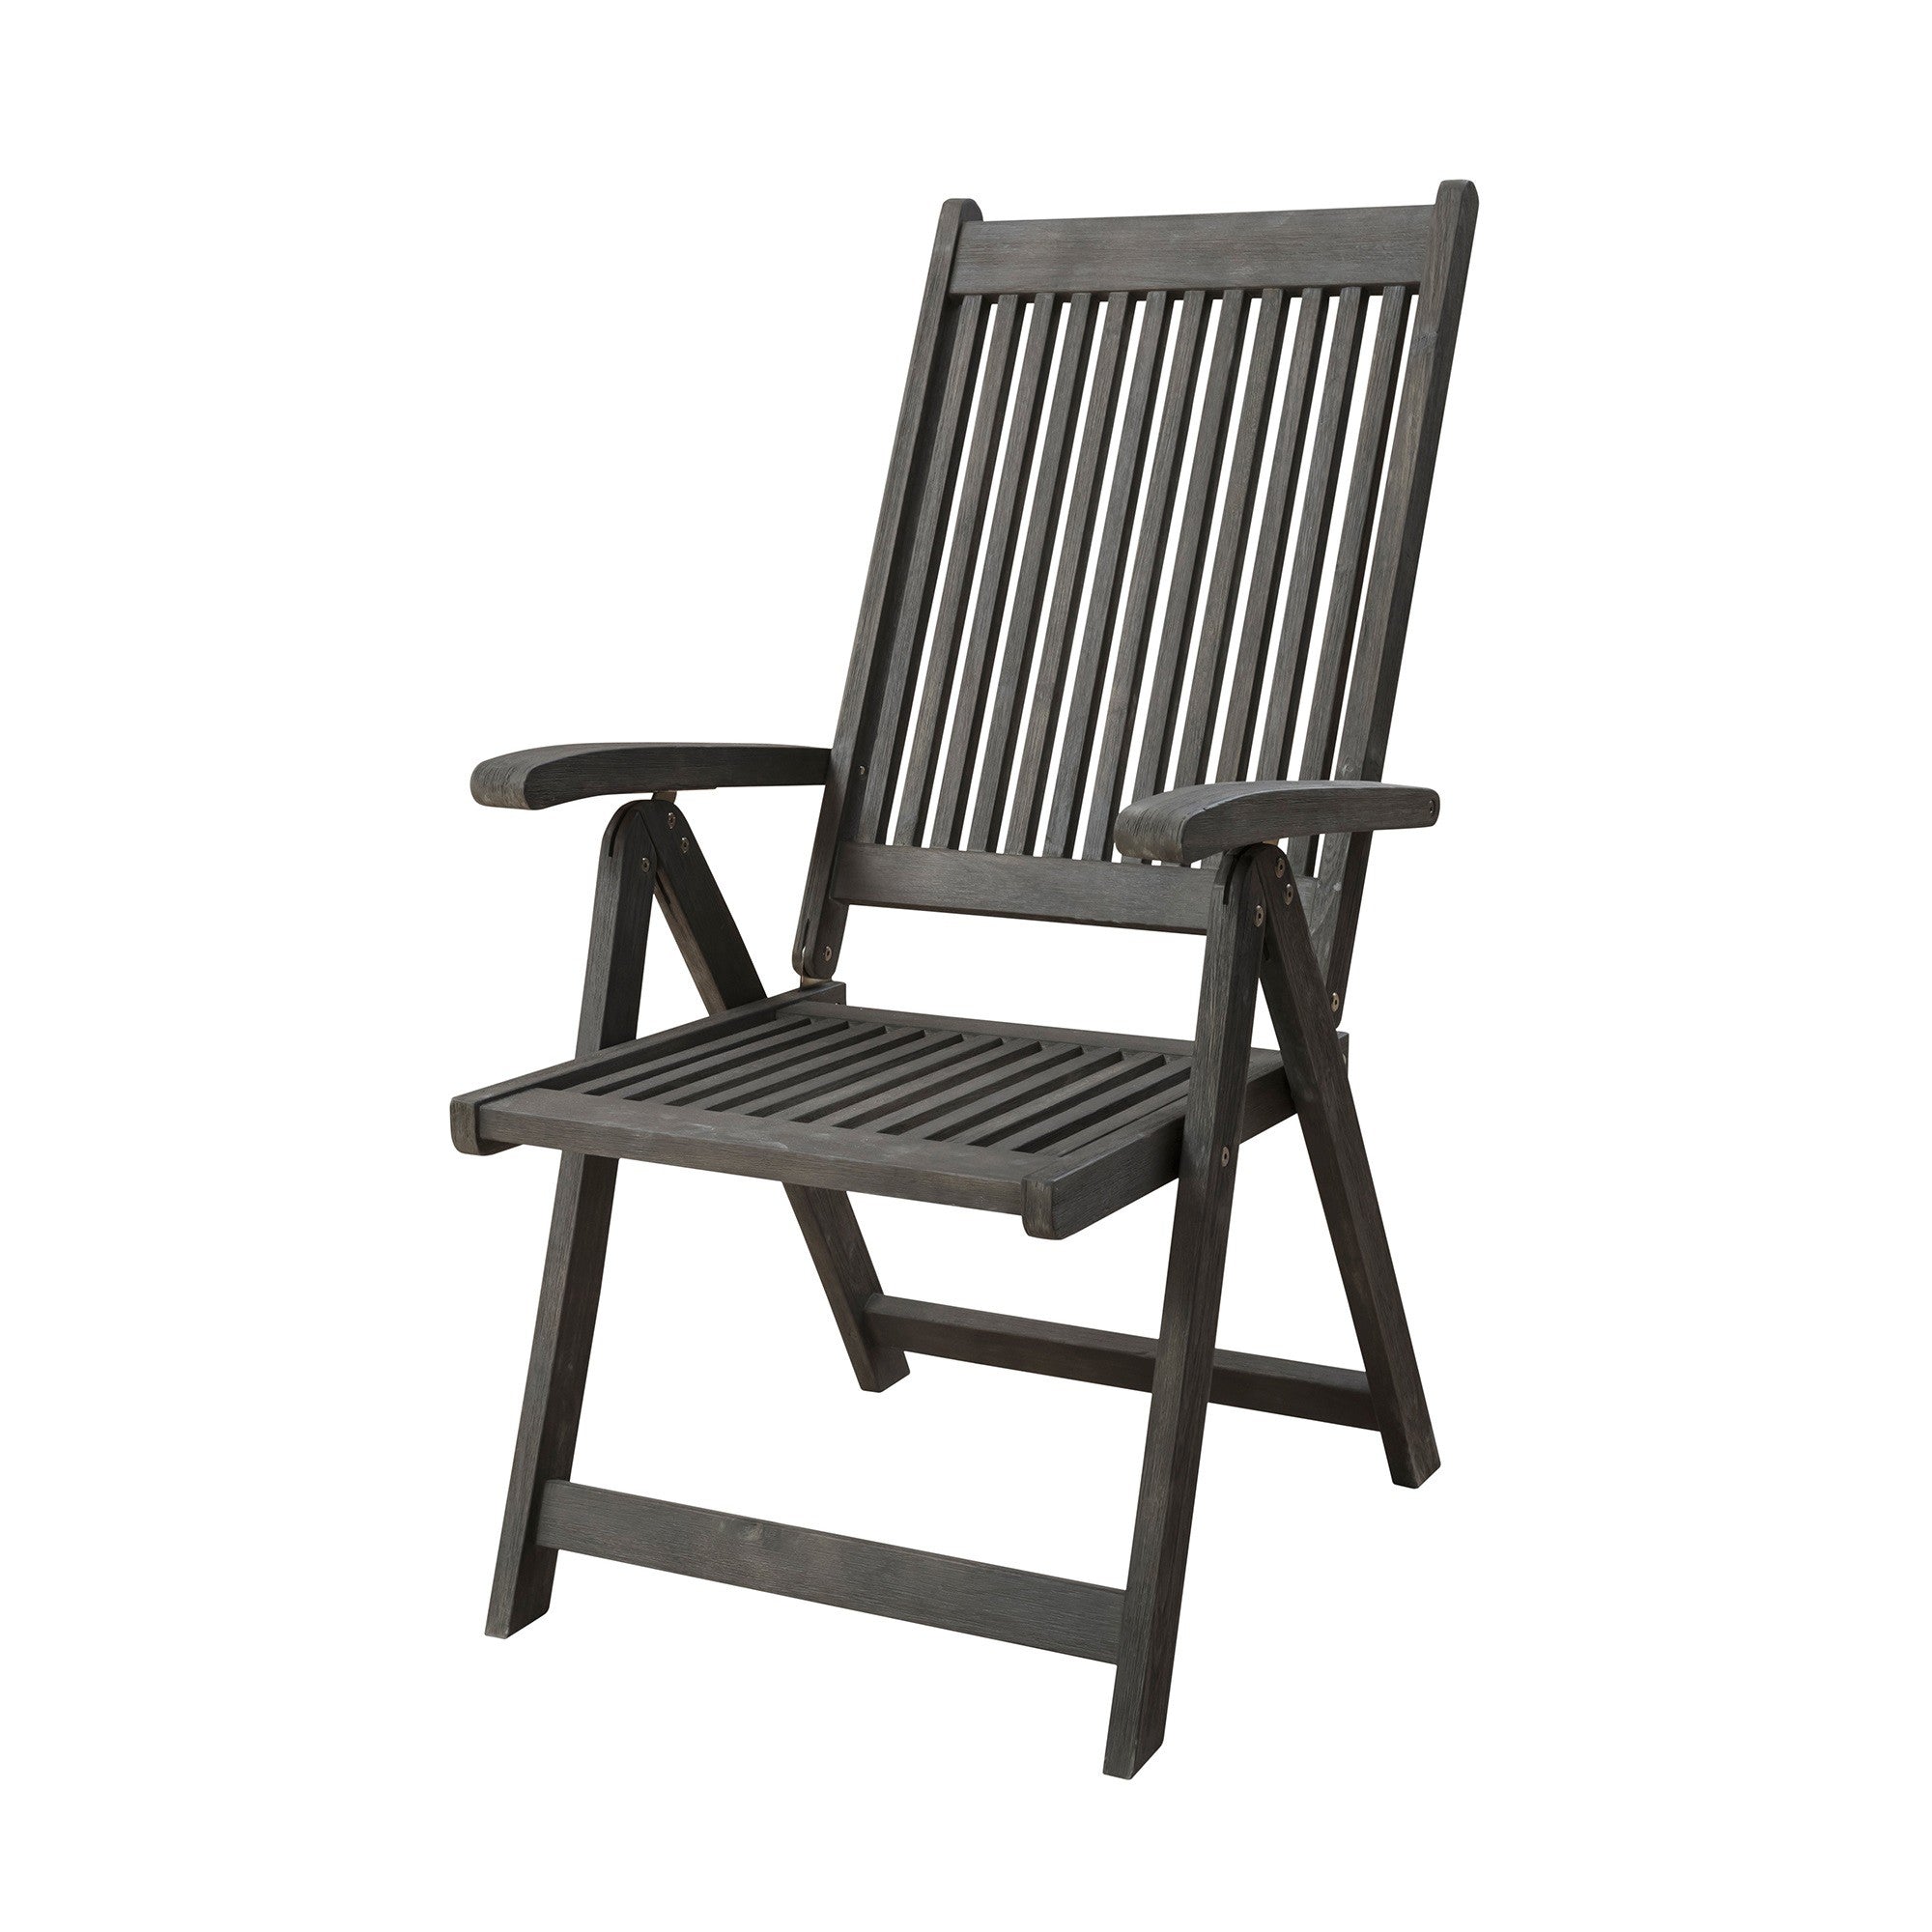 Distressed-Outdoor-Reclining-Chair-Outdoor-Chairs